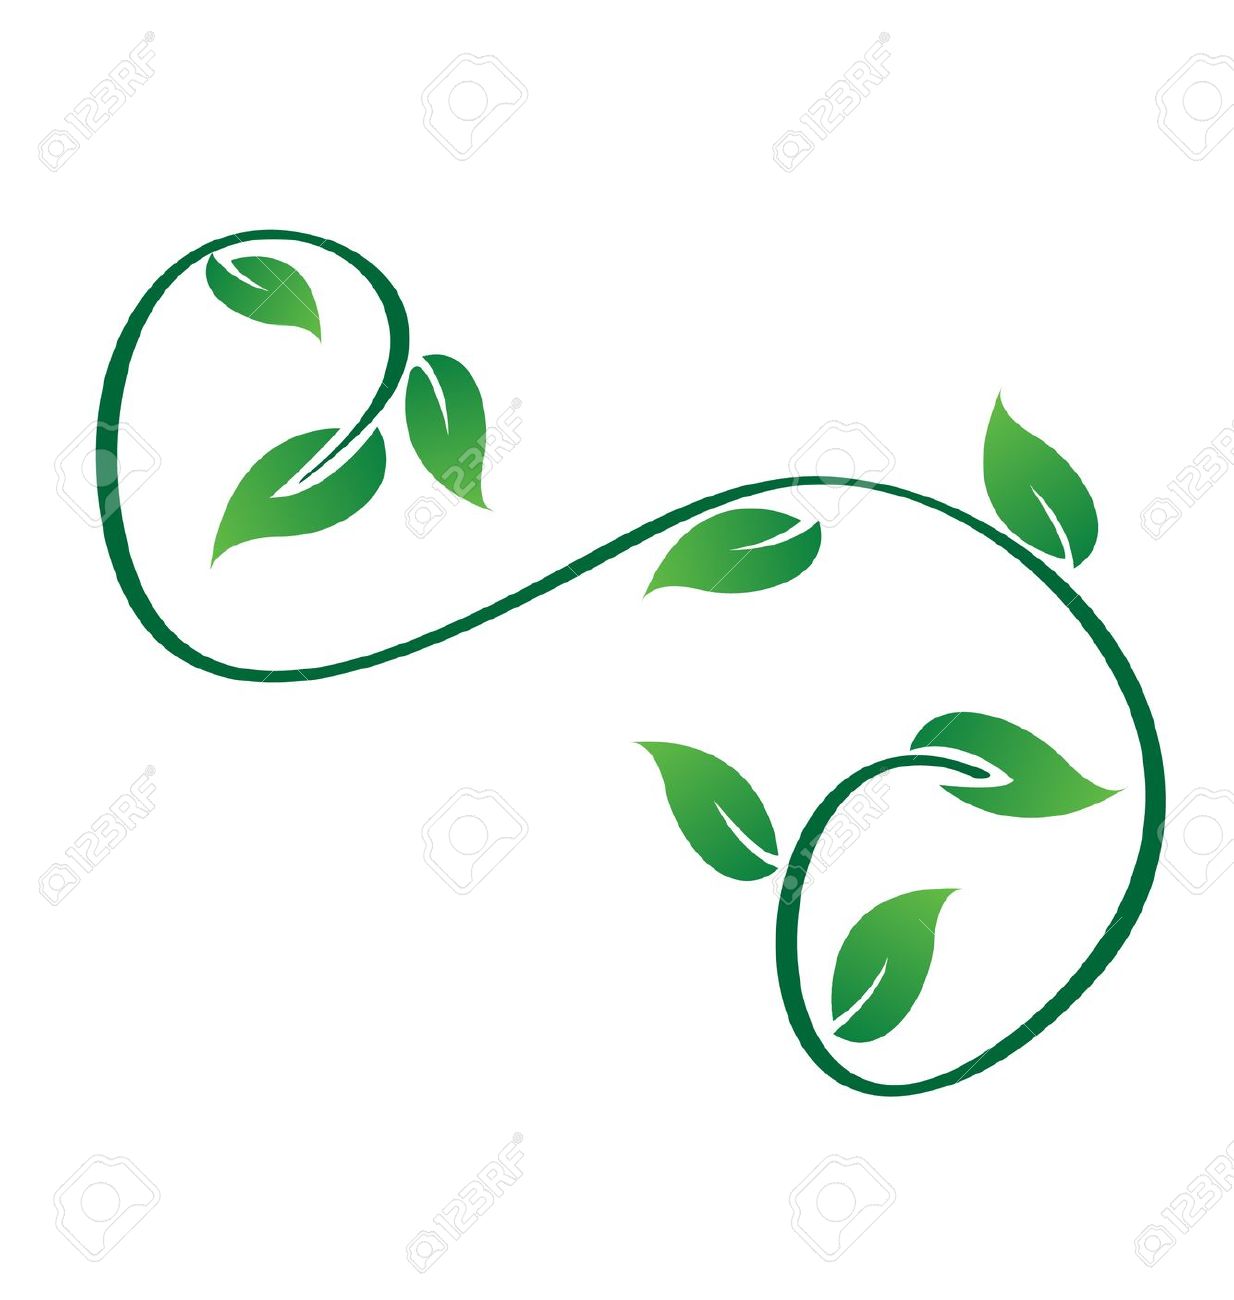 Ivy Leaves Clipart.